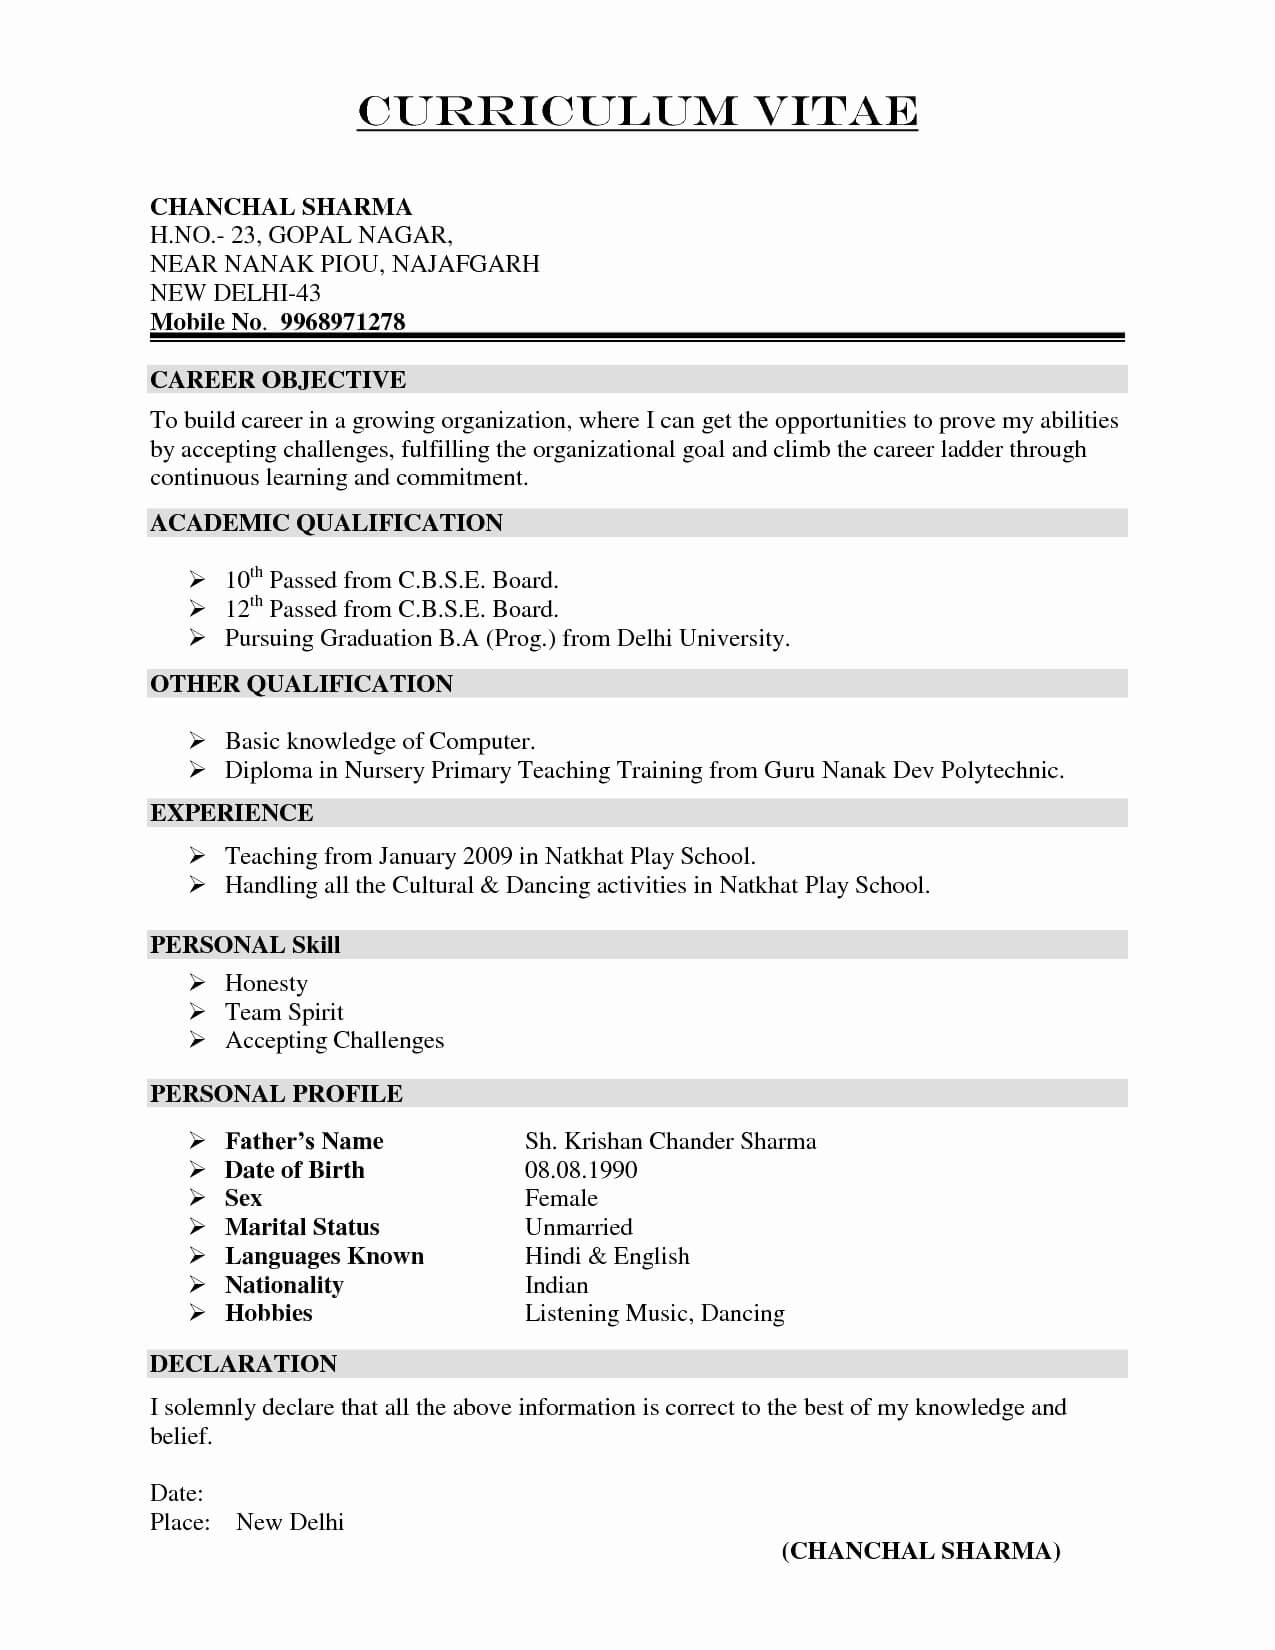 Free Blank Resume Templates For Microsoft Word – Yatay With Free Blank Resume Templates For Microsoft Word